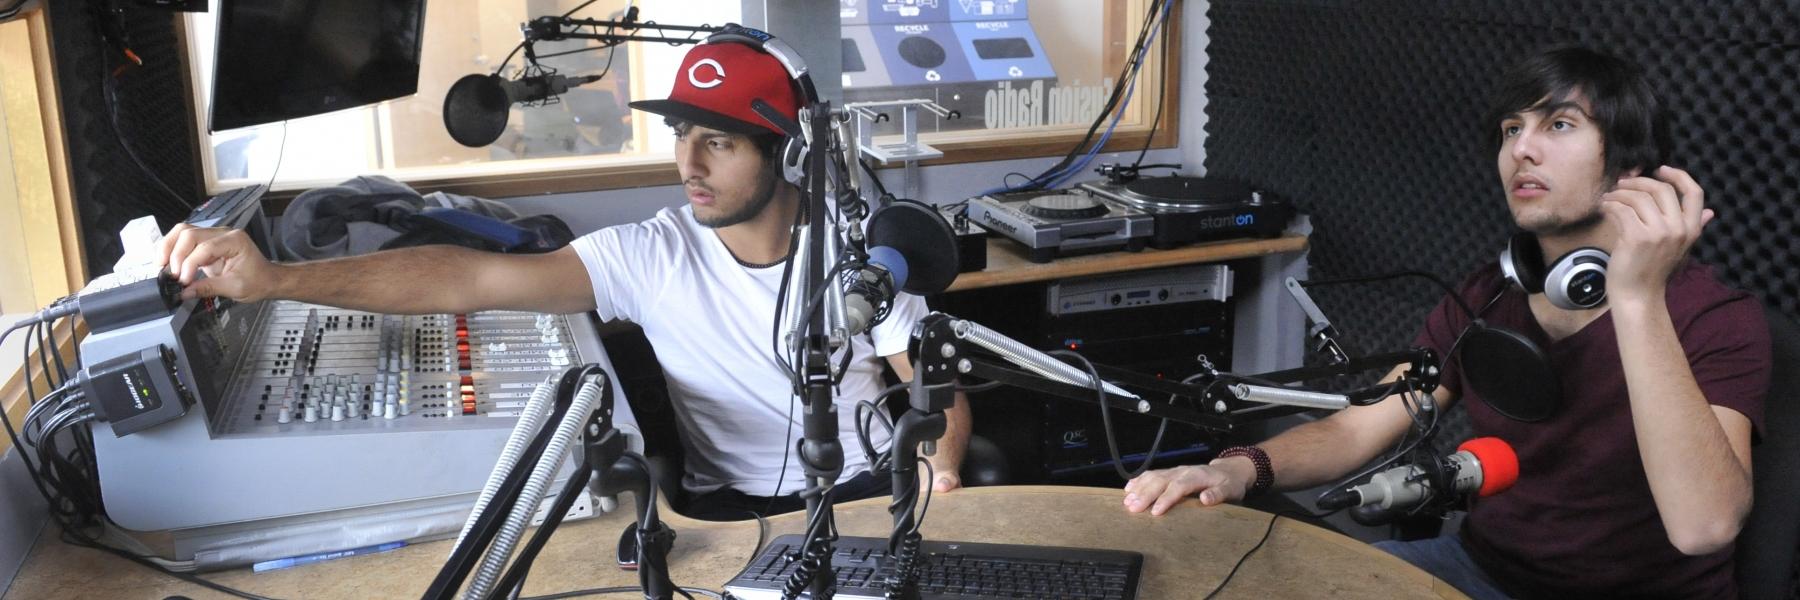 students in campus radio station